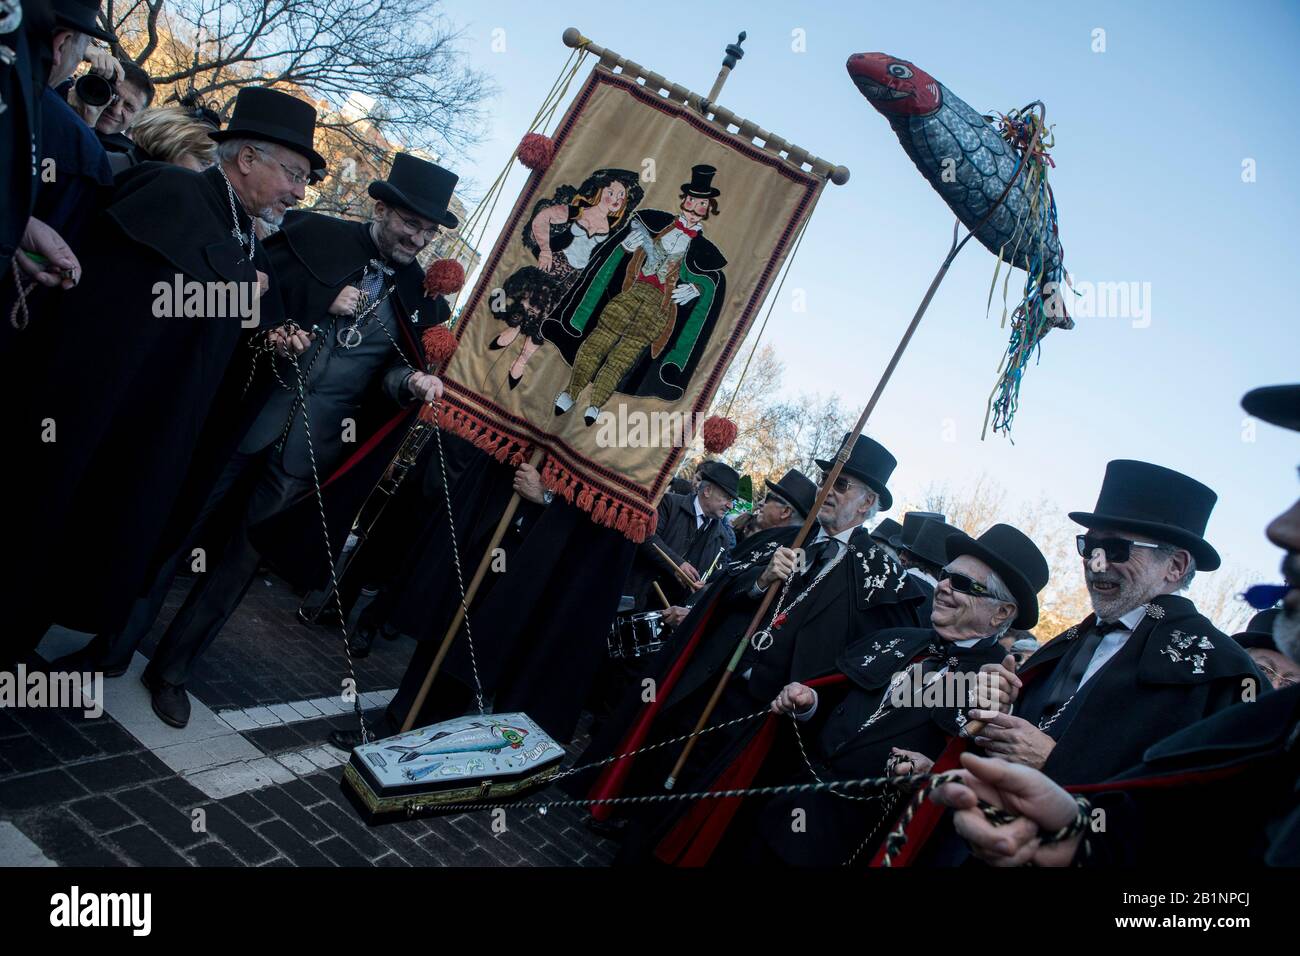 The Brotherhood of the ''Burial of the Sardine'' carry a coffin containing an artificial sardine during the Burial of the Sardine procession. The Sardine procession which takes place in Madrid, is a centuries-old Spanish tradition made famous by a painting of the Spanish artist Francisco de Goya called ‘The Burial of the Sardine'. It mark the end of Carnival celebrations and the beginning of Lent 40 days before Easter. It consists of a procession that parodies a funeral in which a symbolic figure of a sardine in its coffin is burned. The festivity takes place every Ash Wednesday and symboliz Stock Photo